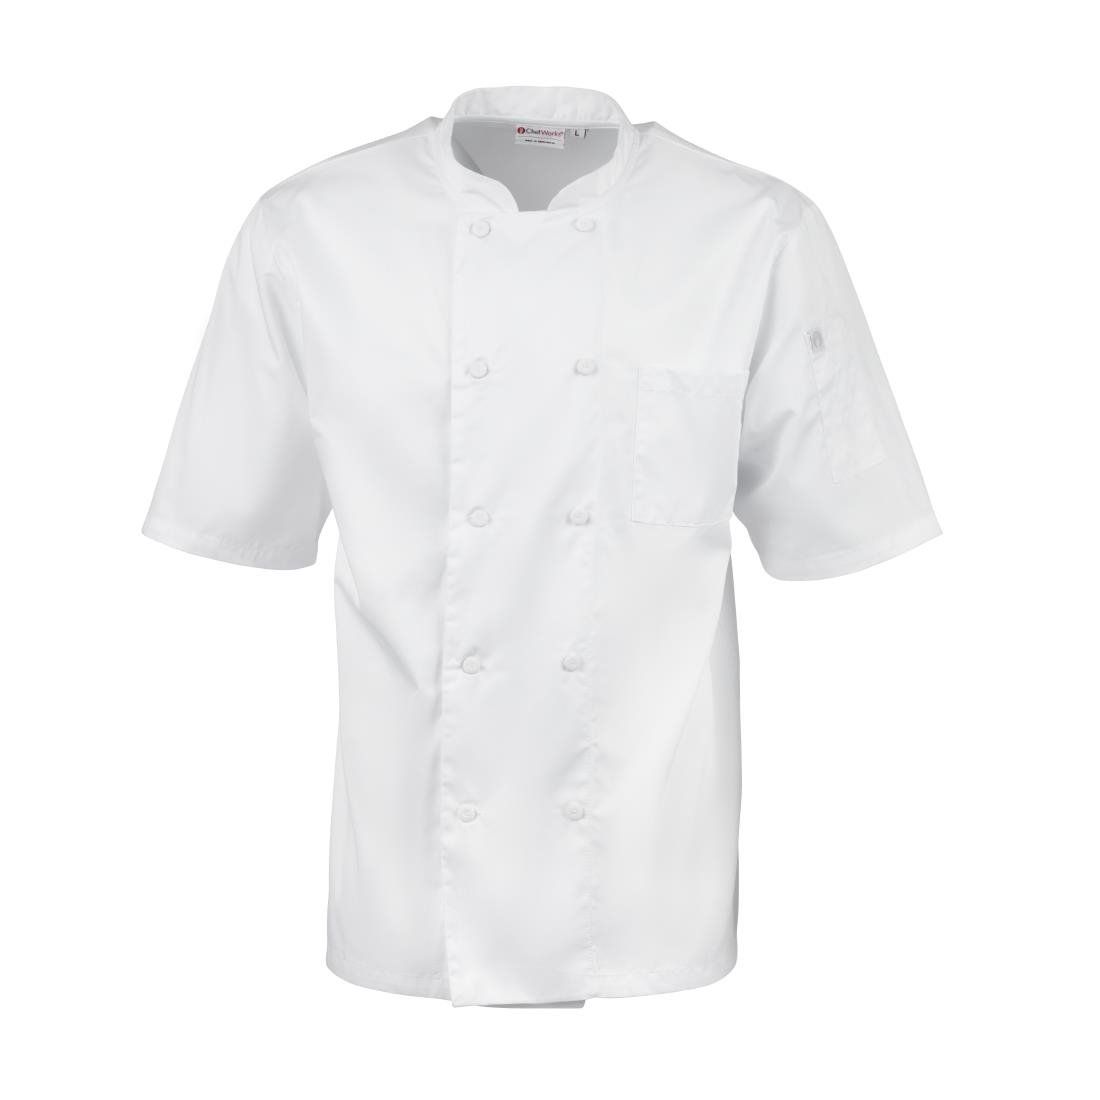 A914-L Chefs Works Montreal Cool Vent Unisex Short Sleeve Chefs Jacket White L